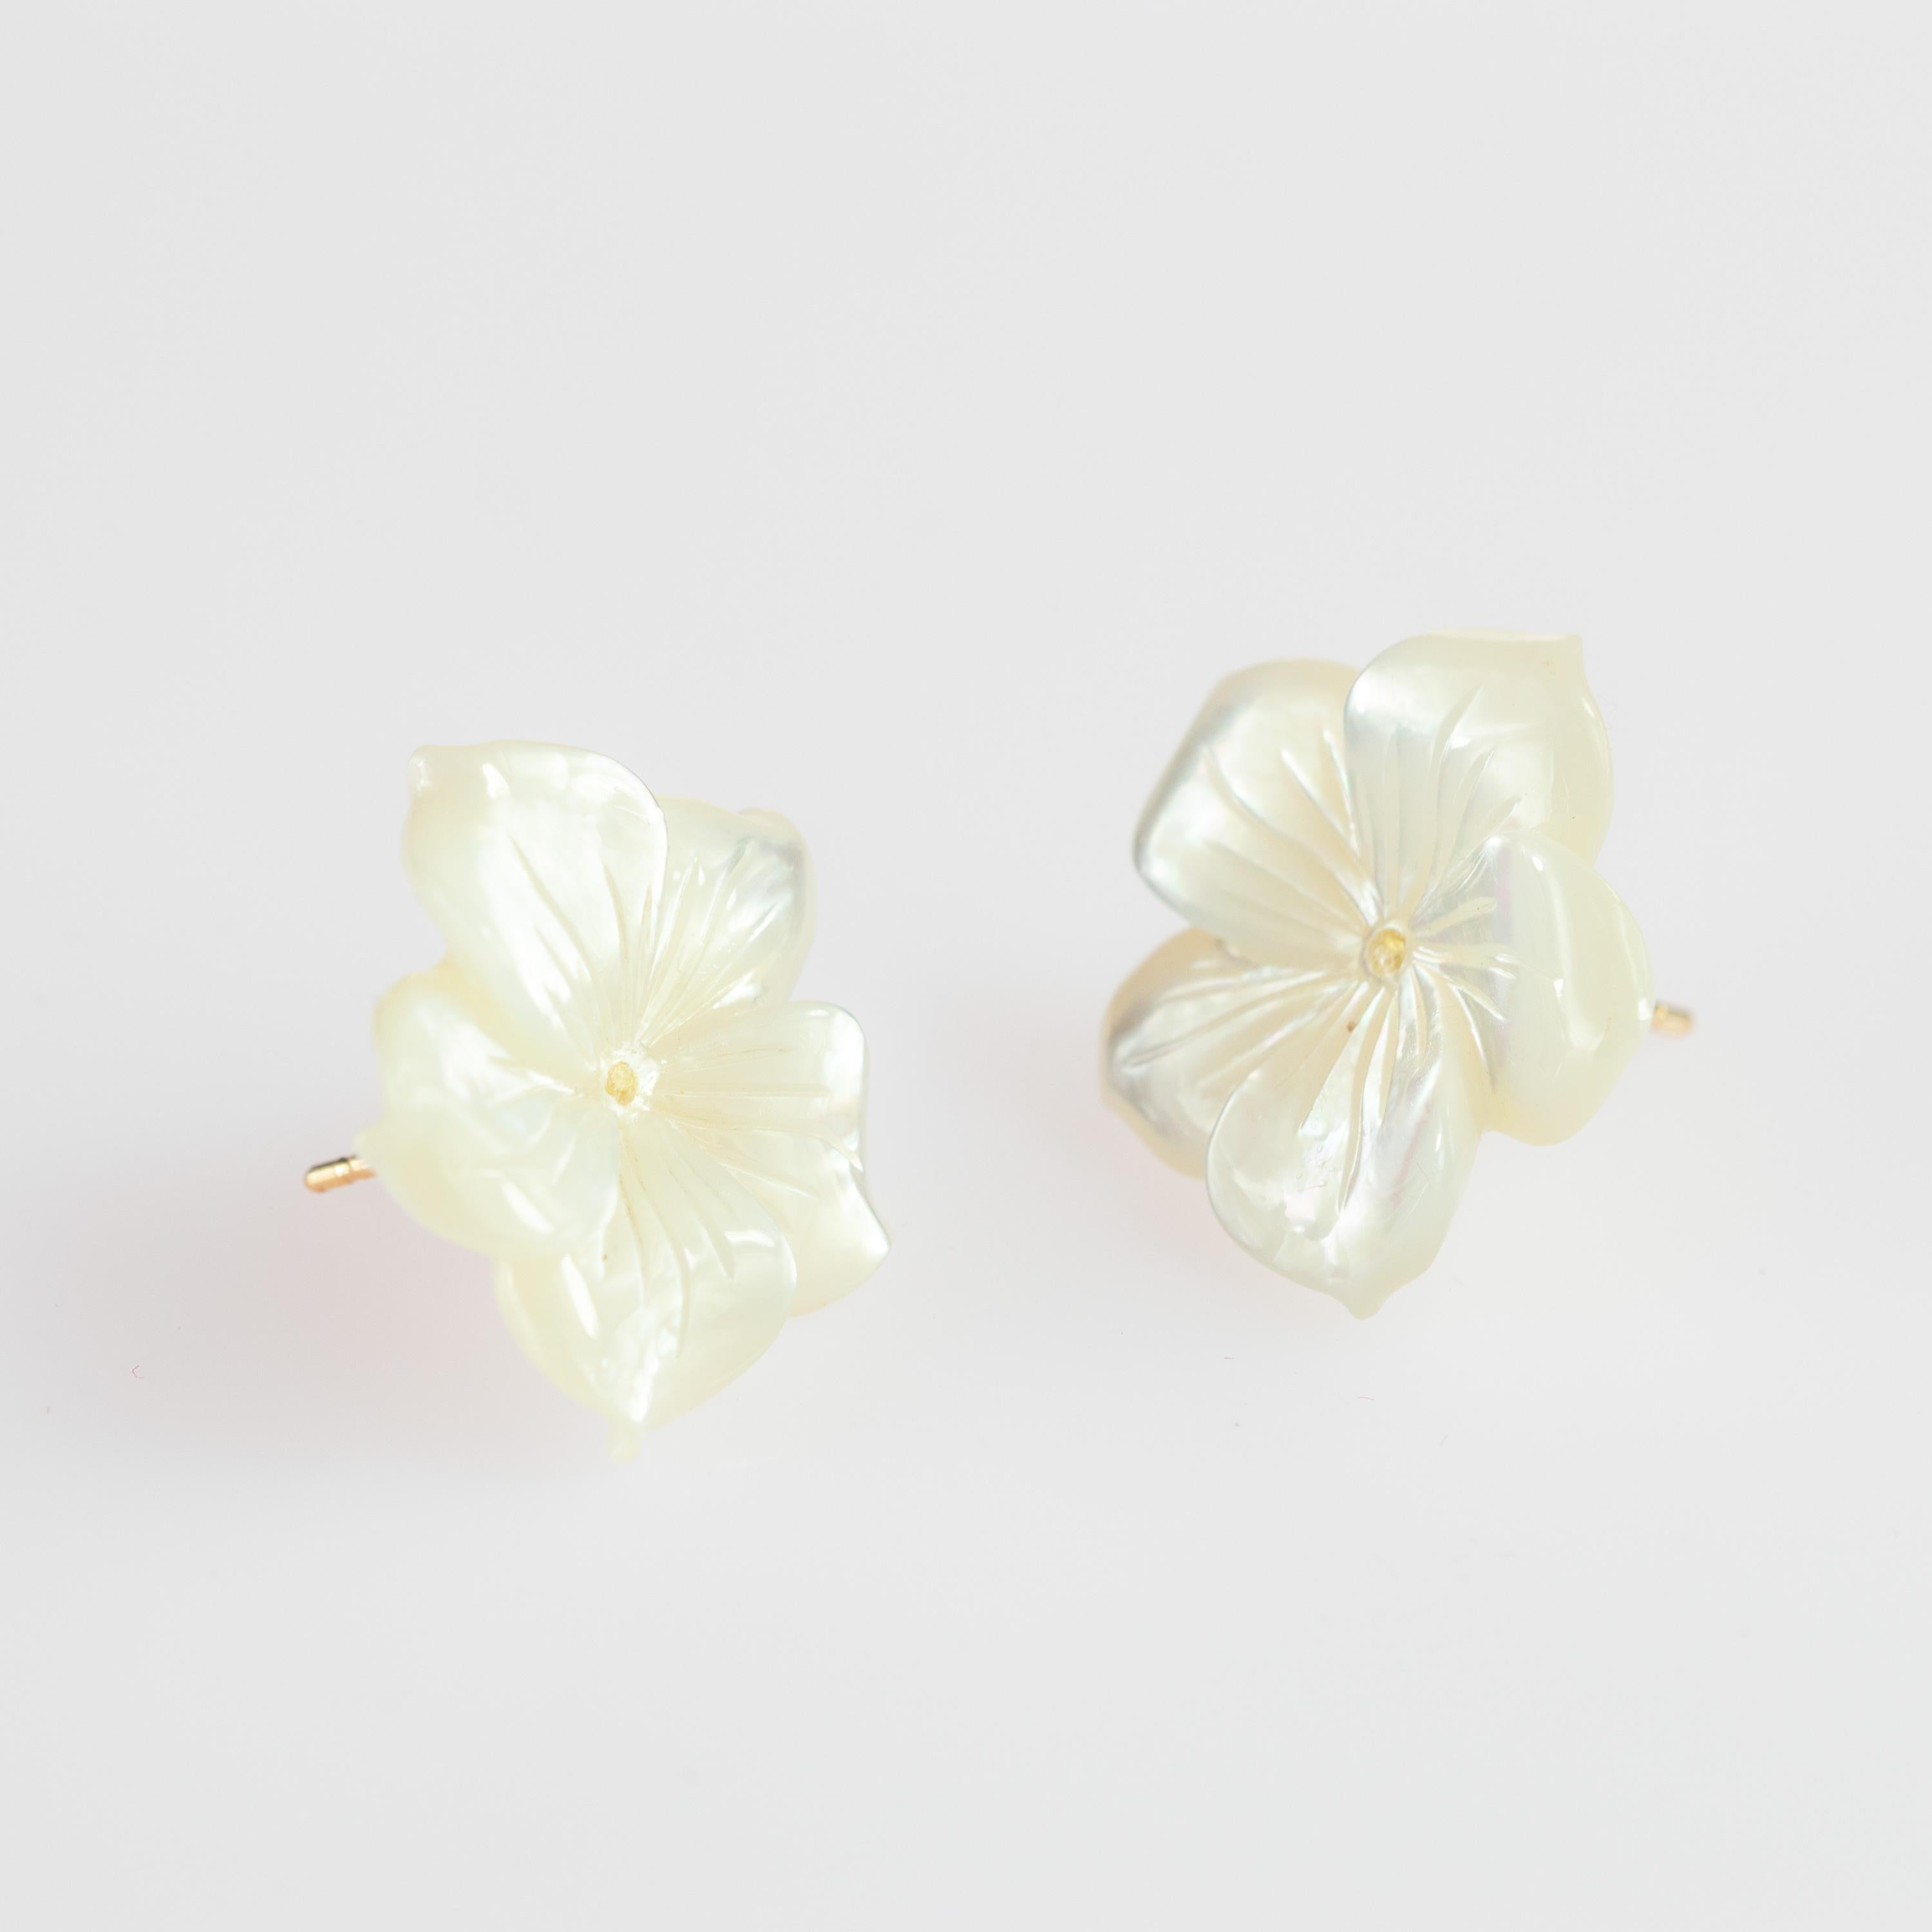 Mixed Cut Intini Jewels Mother of Pearl Carved White Flower 9 Karat Gold Stud Earrings For Sale